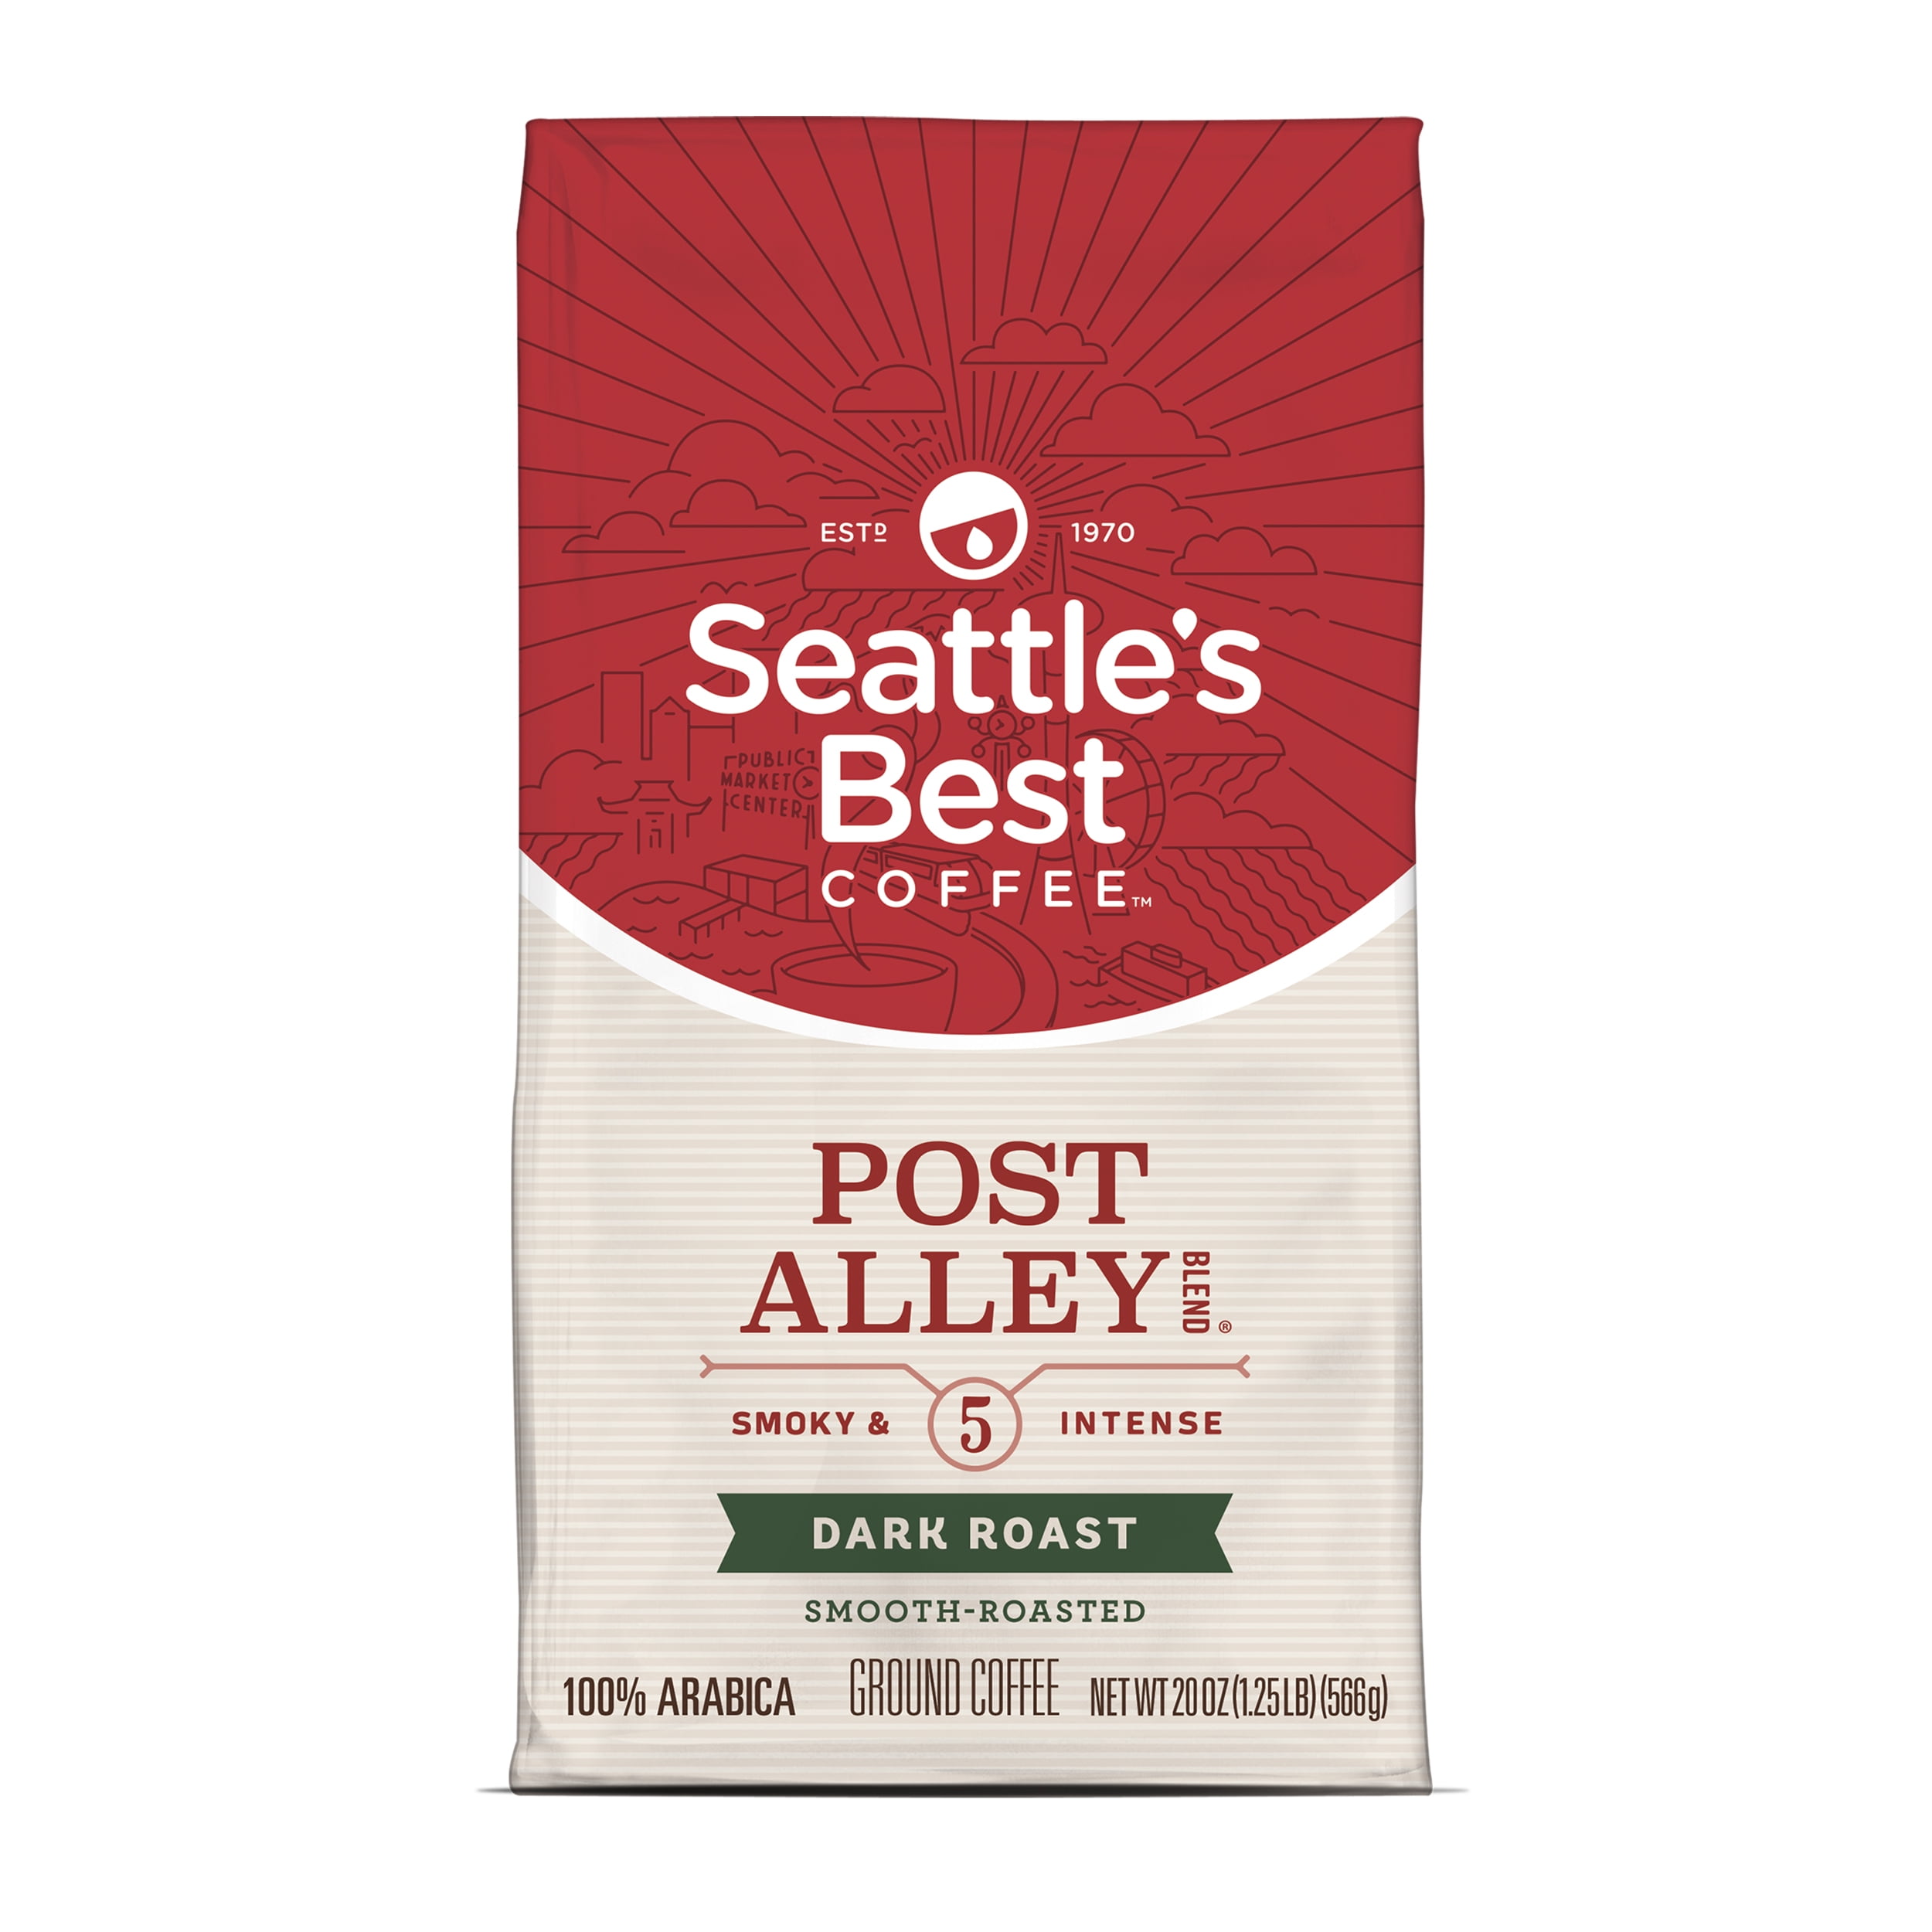 Seattles Best Coffee Post Alley Blend (Previously